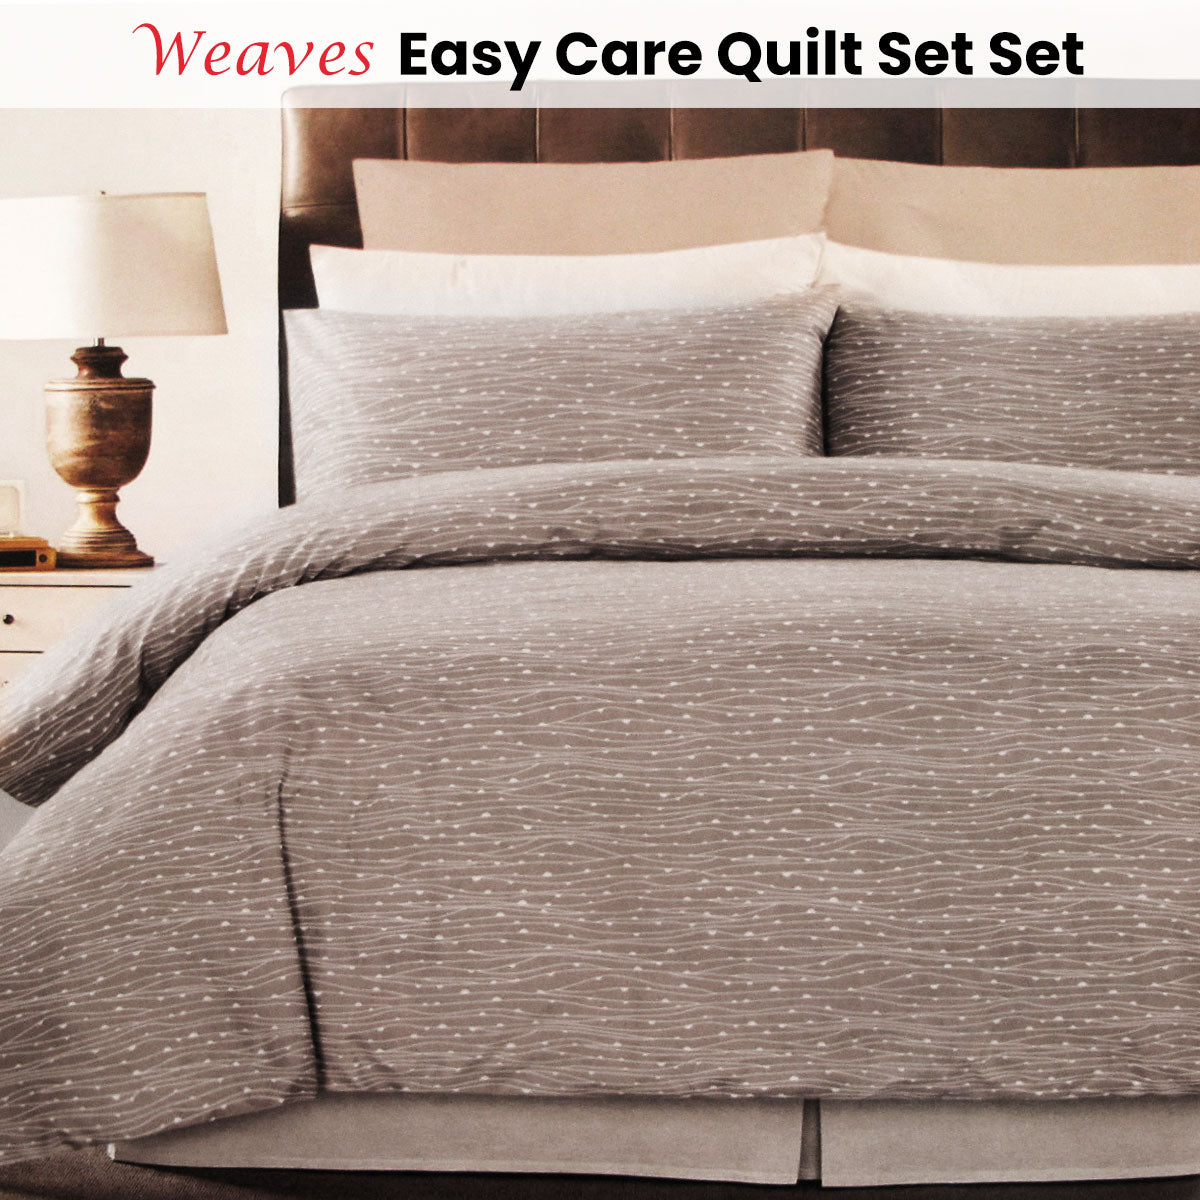 Weaves Coffee Easy Care Quilt Cover Set King - 0